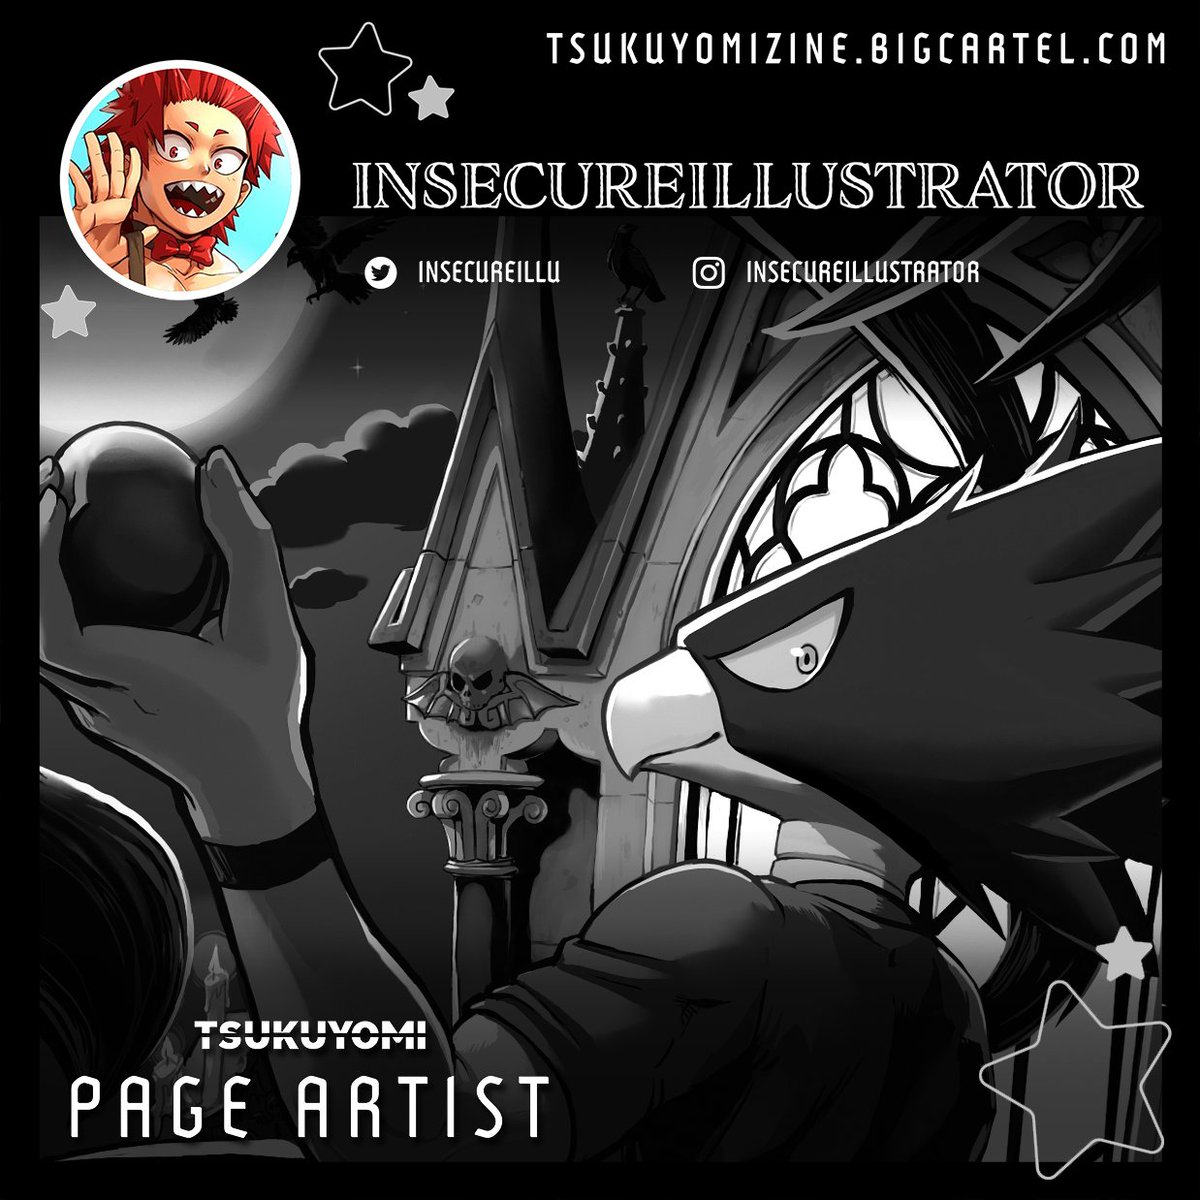 I've forged another dark offering to @tsukuyomizine! Behold, my final contribution! I cast it into the abyss of twitter and bid you gaze upon tsukuyomizine.bigcartel.com while you still can! The hourglass runs dry, embrace the darkness before it is too late! Pre-orders end TODAY! 🐦‍⬛